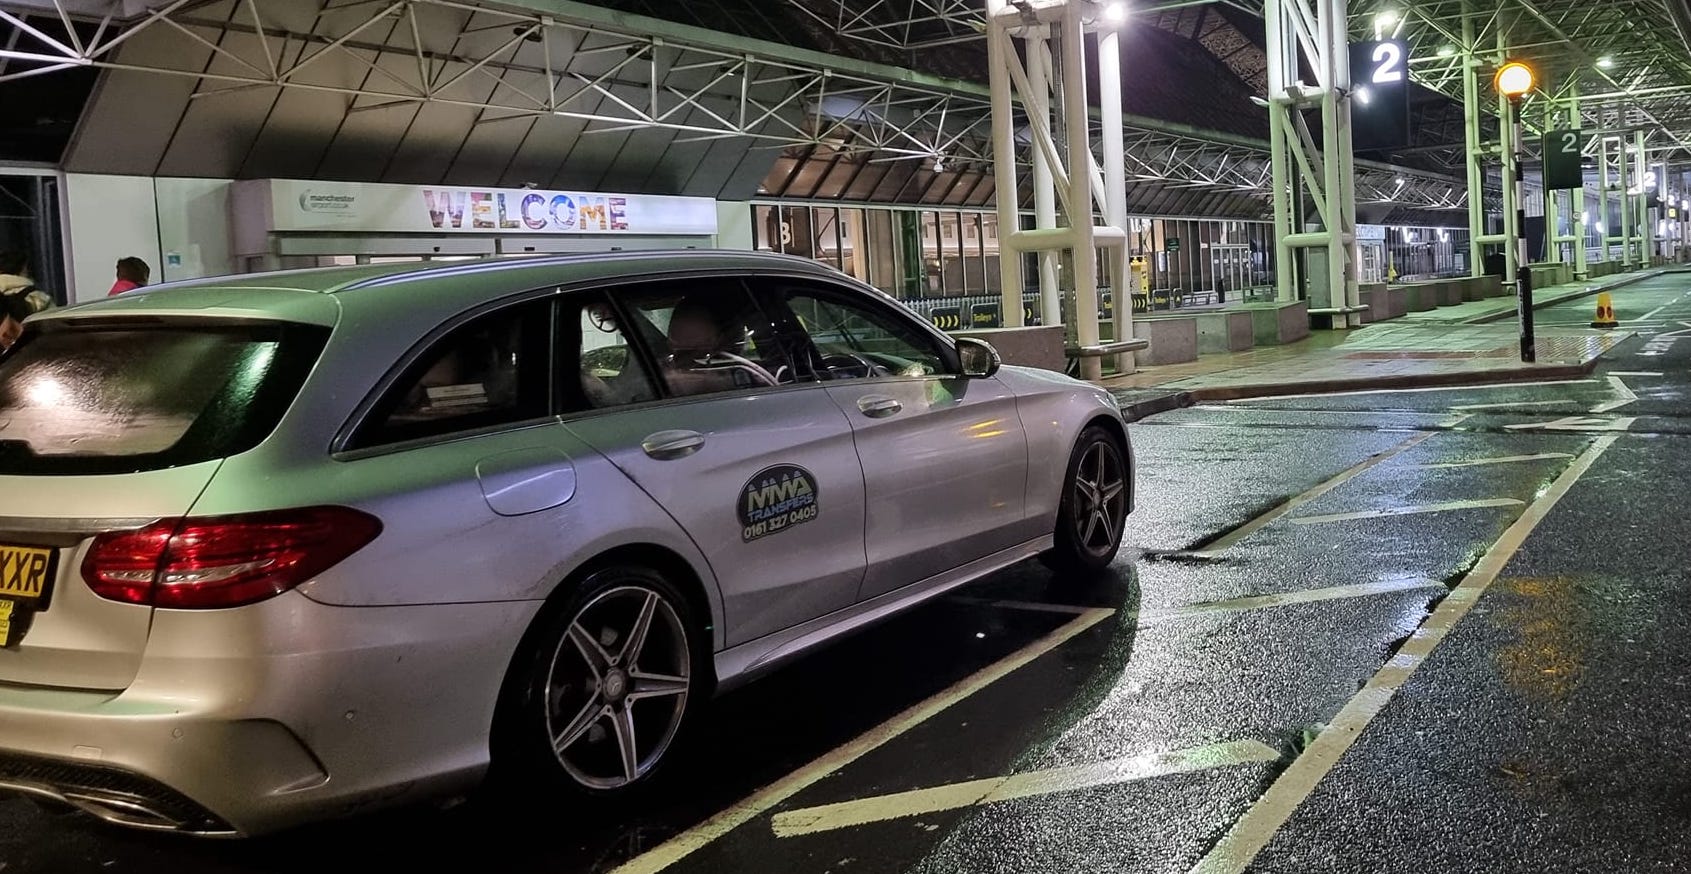 Take a Taxi from Manchester Airport to Denton with a free Meet and Greet Service